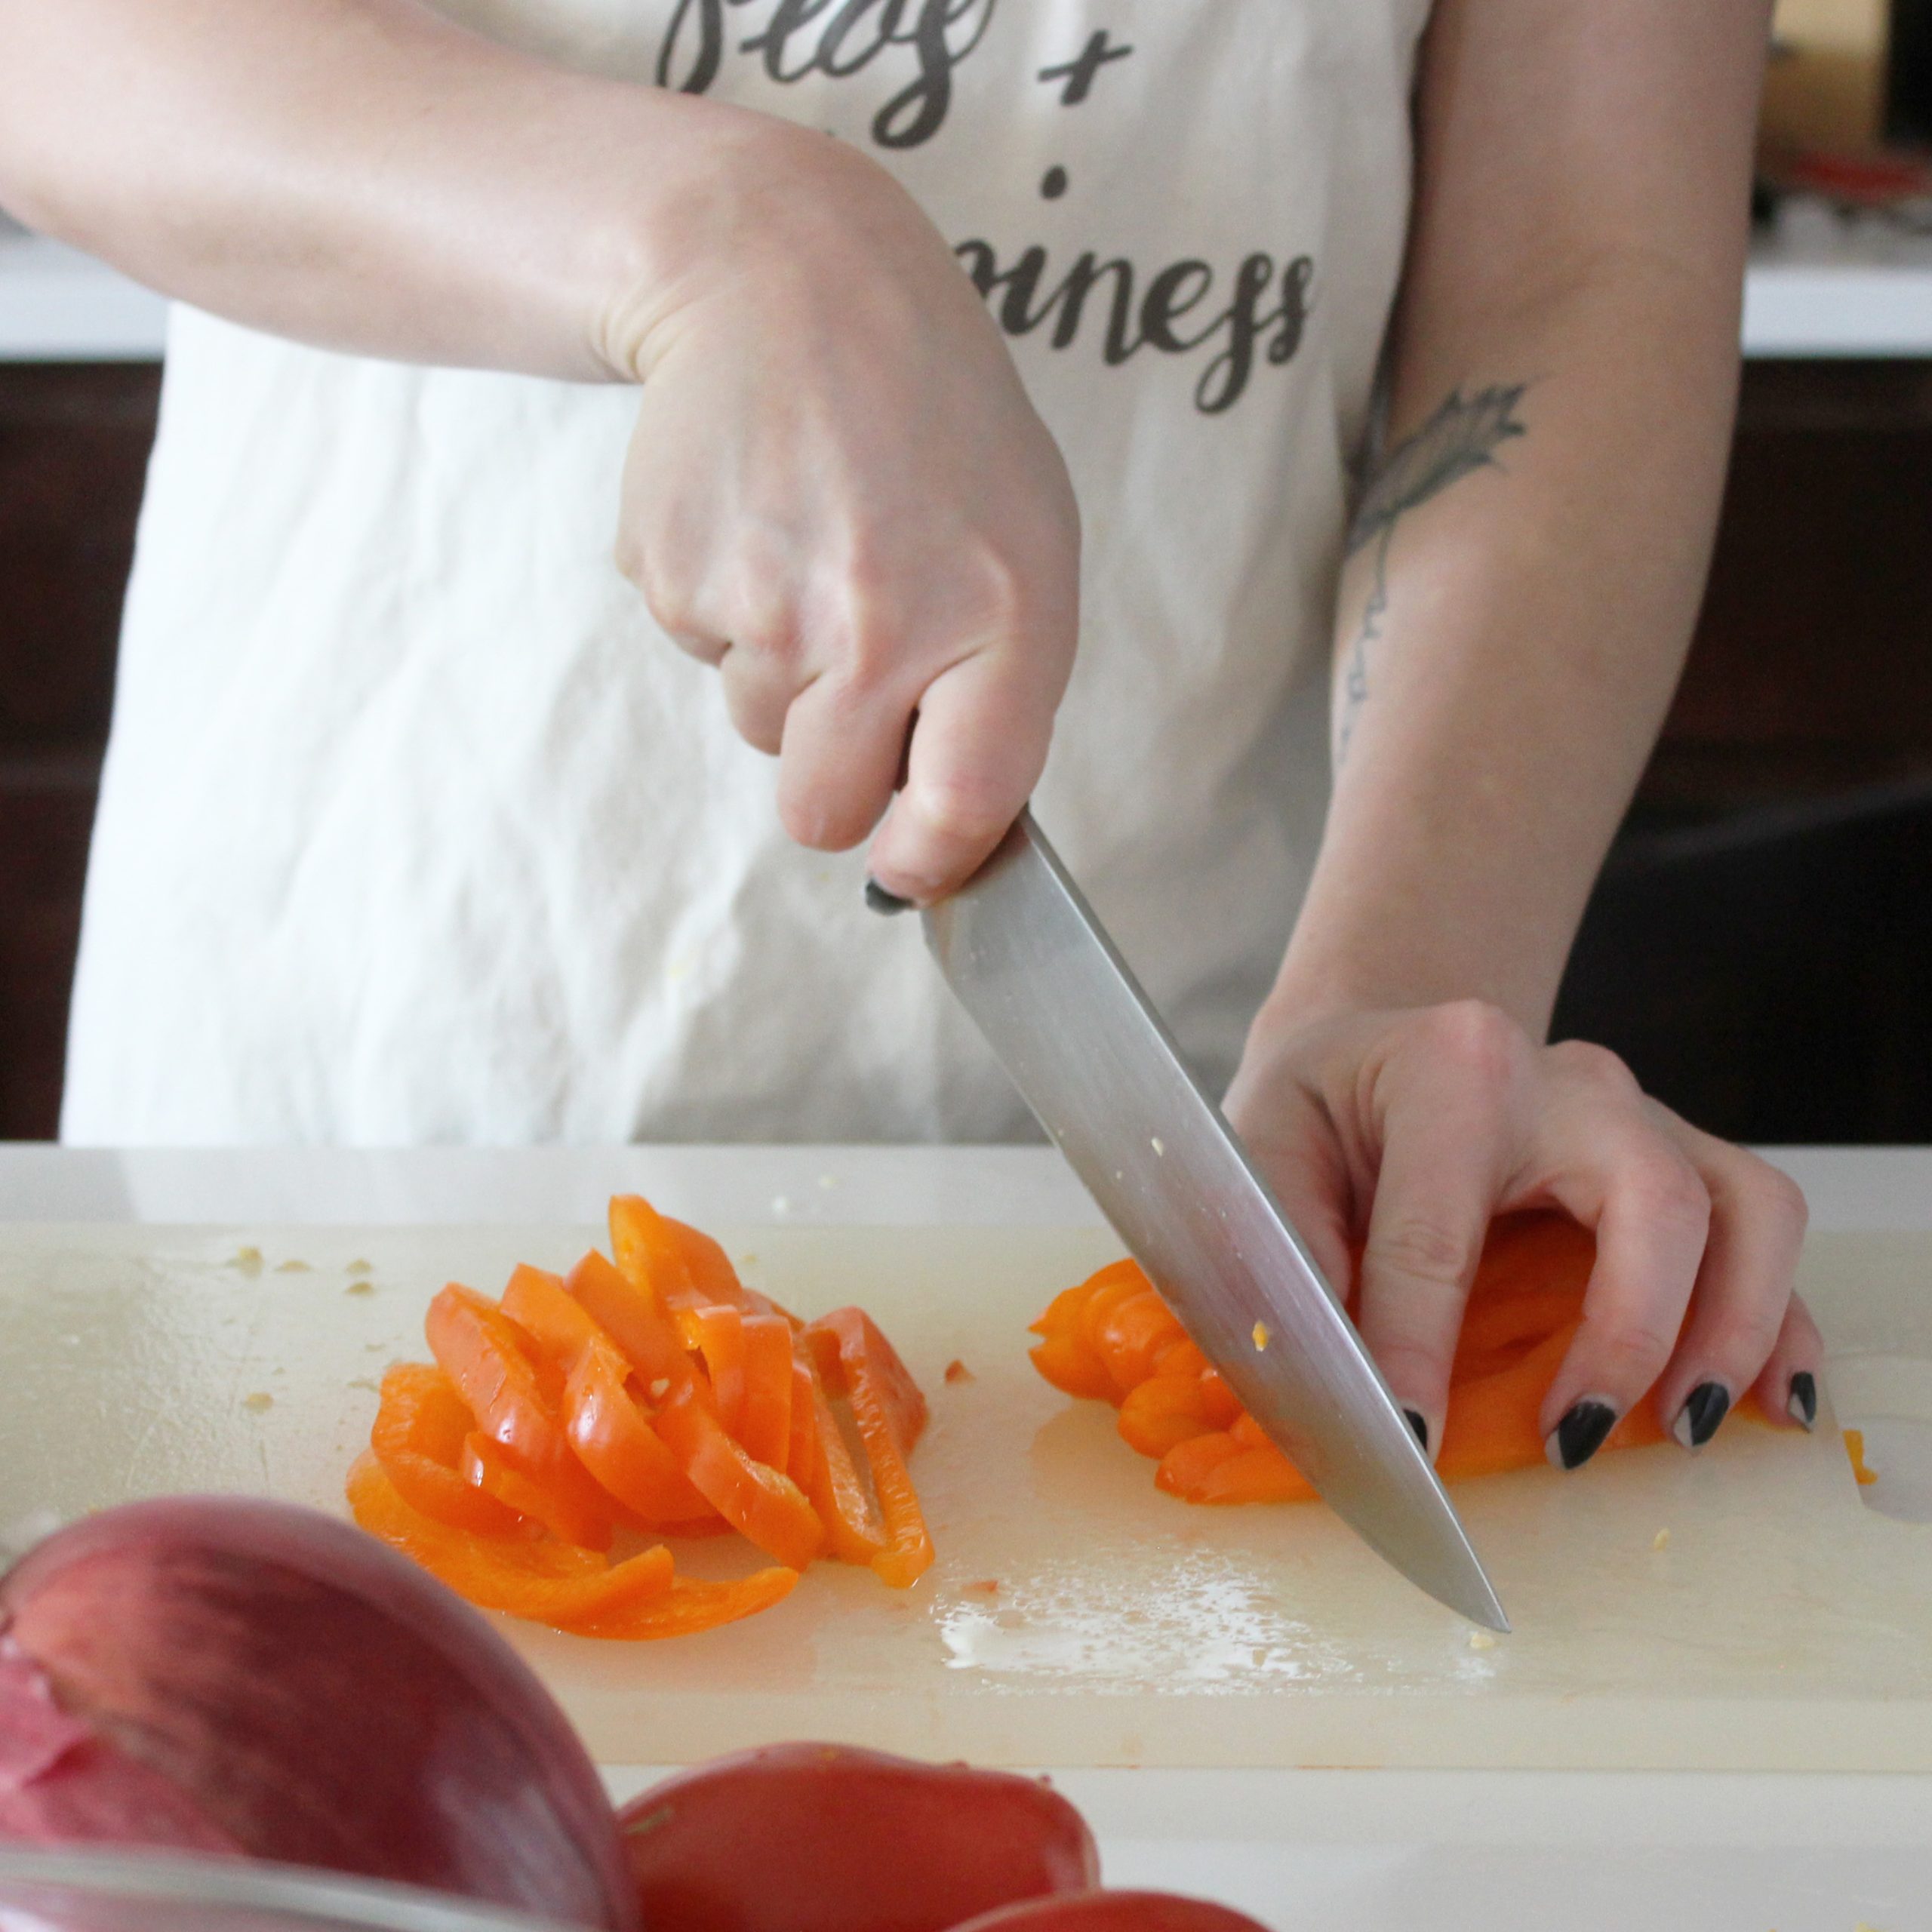 Dicing an orange bell pepper using a chef's knife